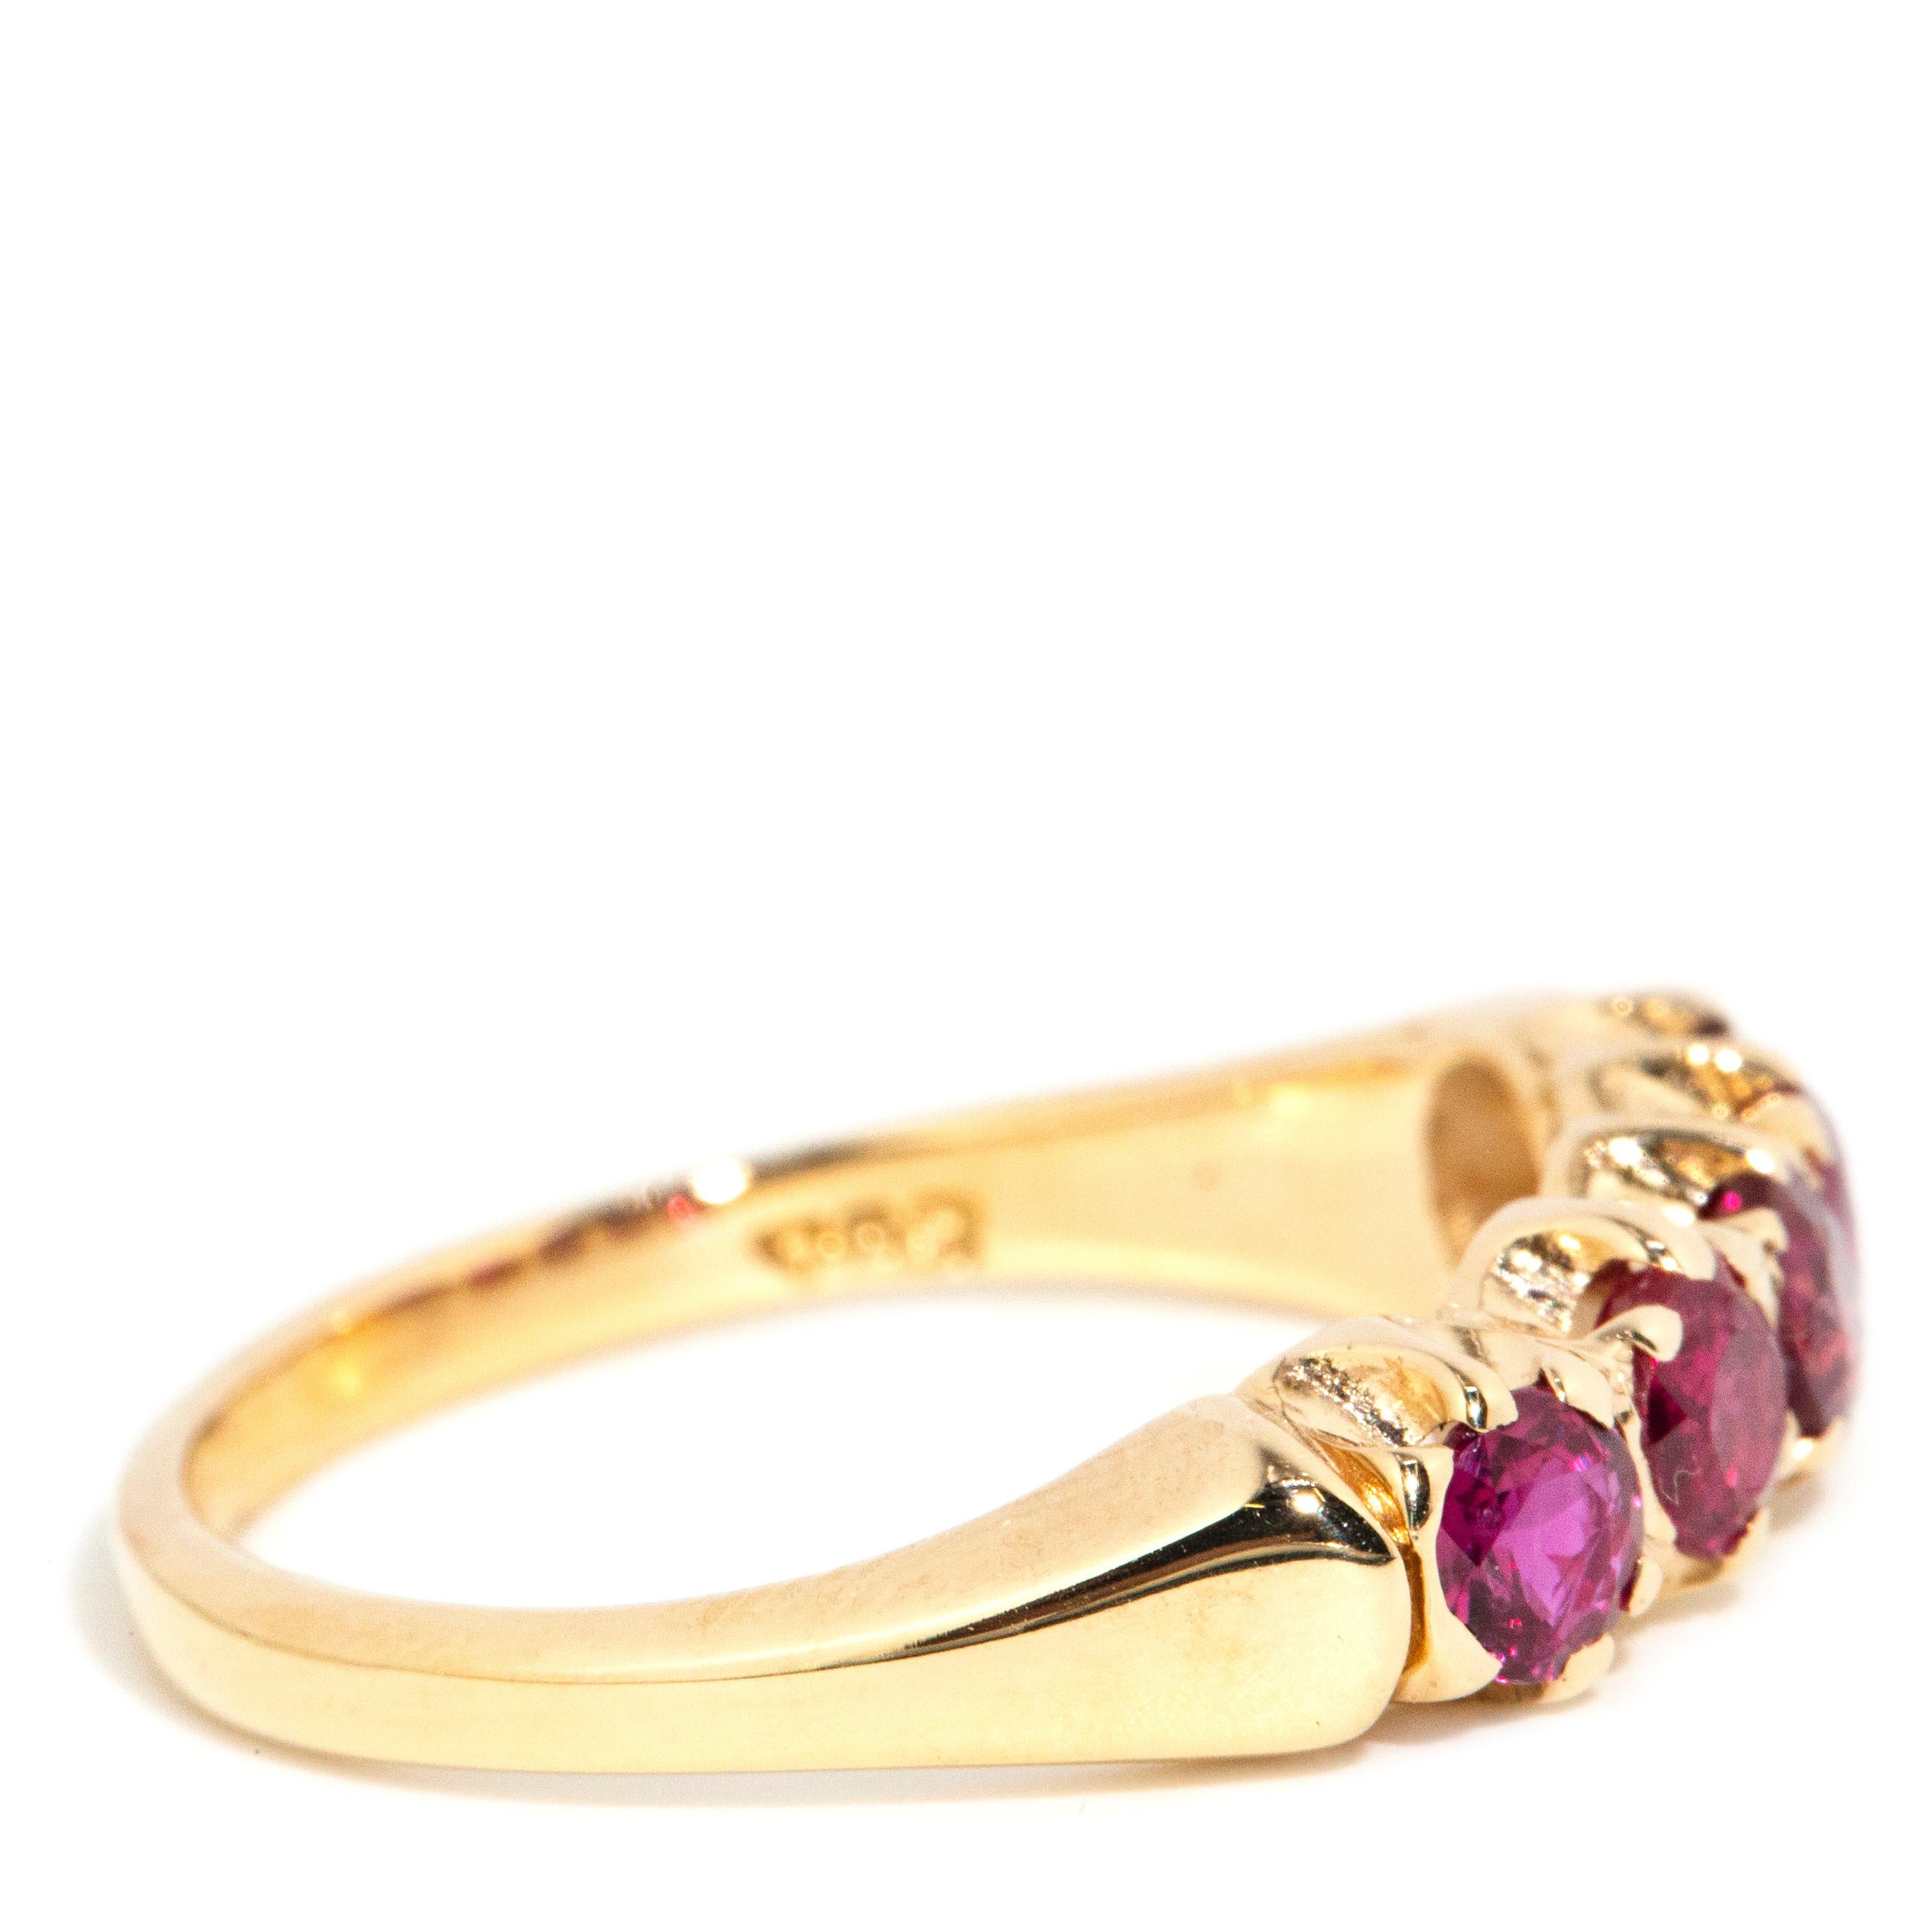 Women's Vintage Circa 1970s 1.00 Carat Natural Ruby Five Stone Ring 9 Carat Yellow Gold For Sale